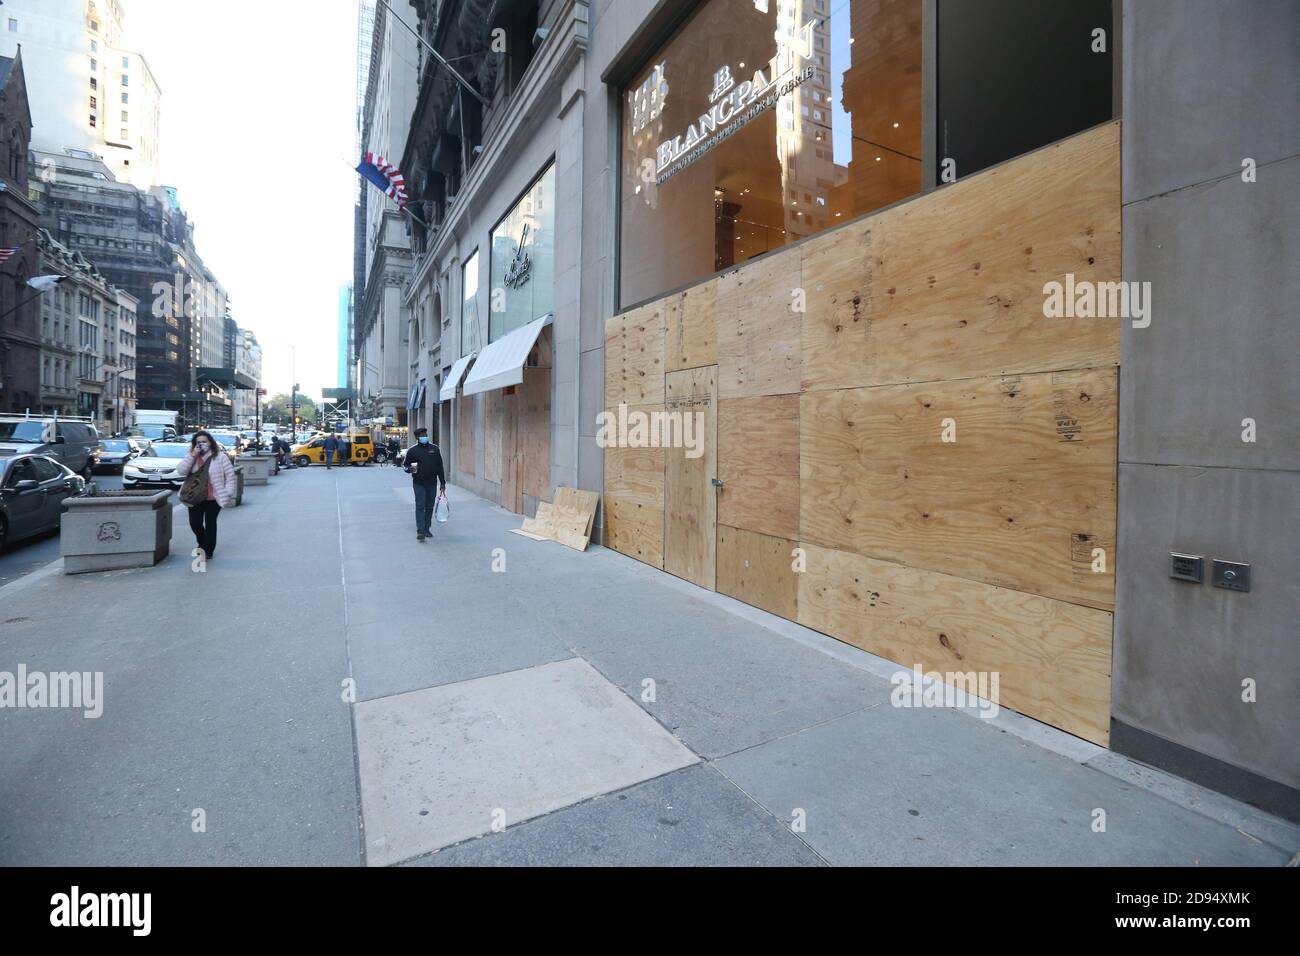 New York, NY, USA. 2nd Nov, 2020. Nov 2, 2020 : New York Stores prepare for possible unrest surrounding election day. Credit: Dan Herrick/ZUMA Wire/Alamy Live News Stock Photo